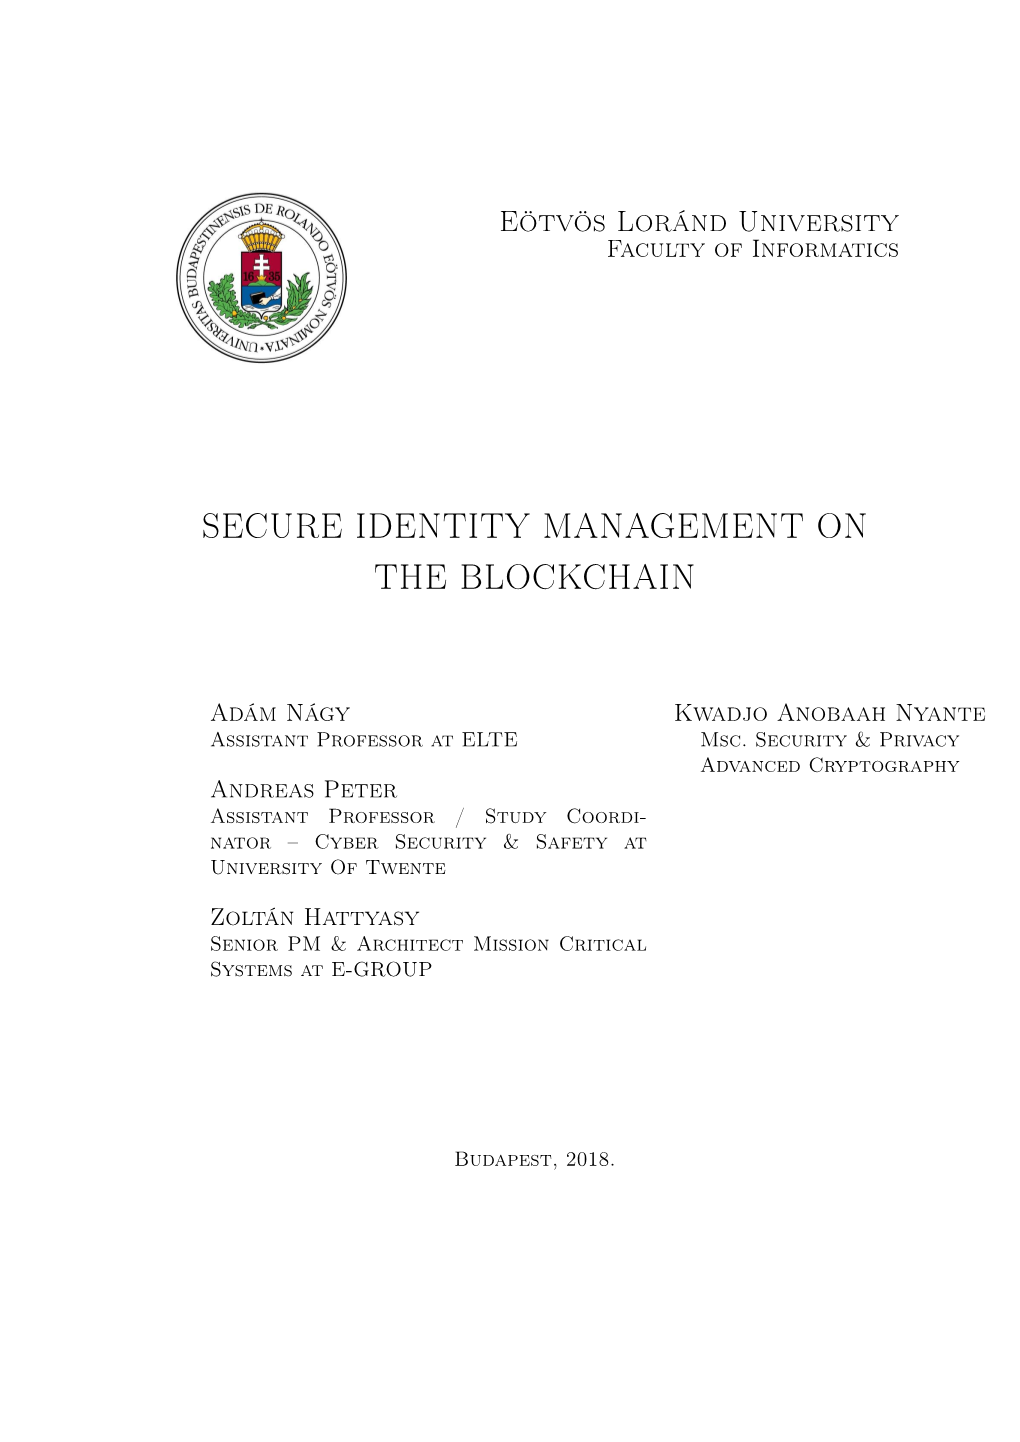 Secure Identity Management on the Blockchain